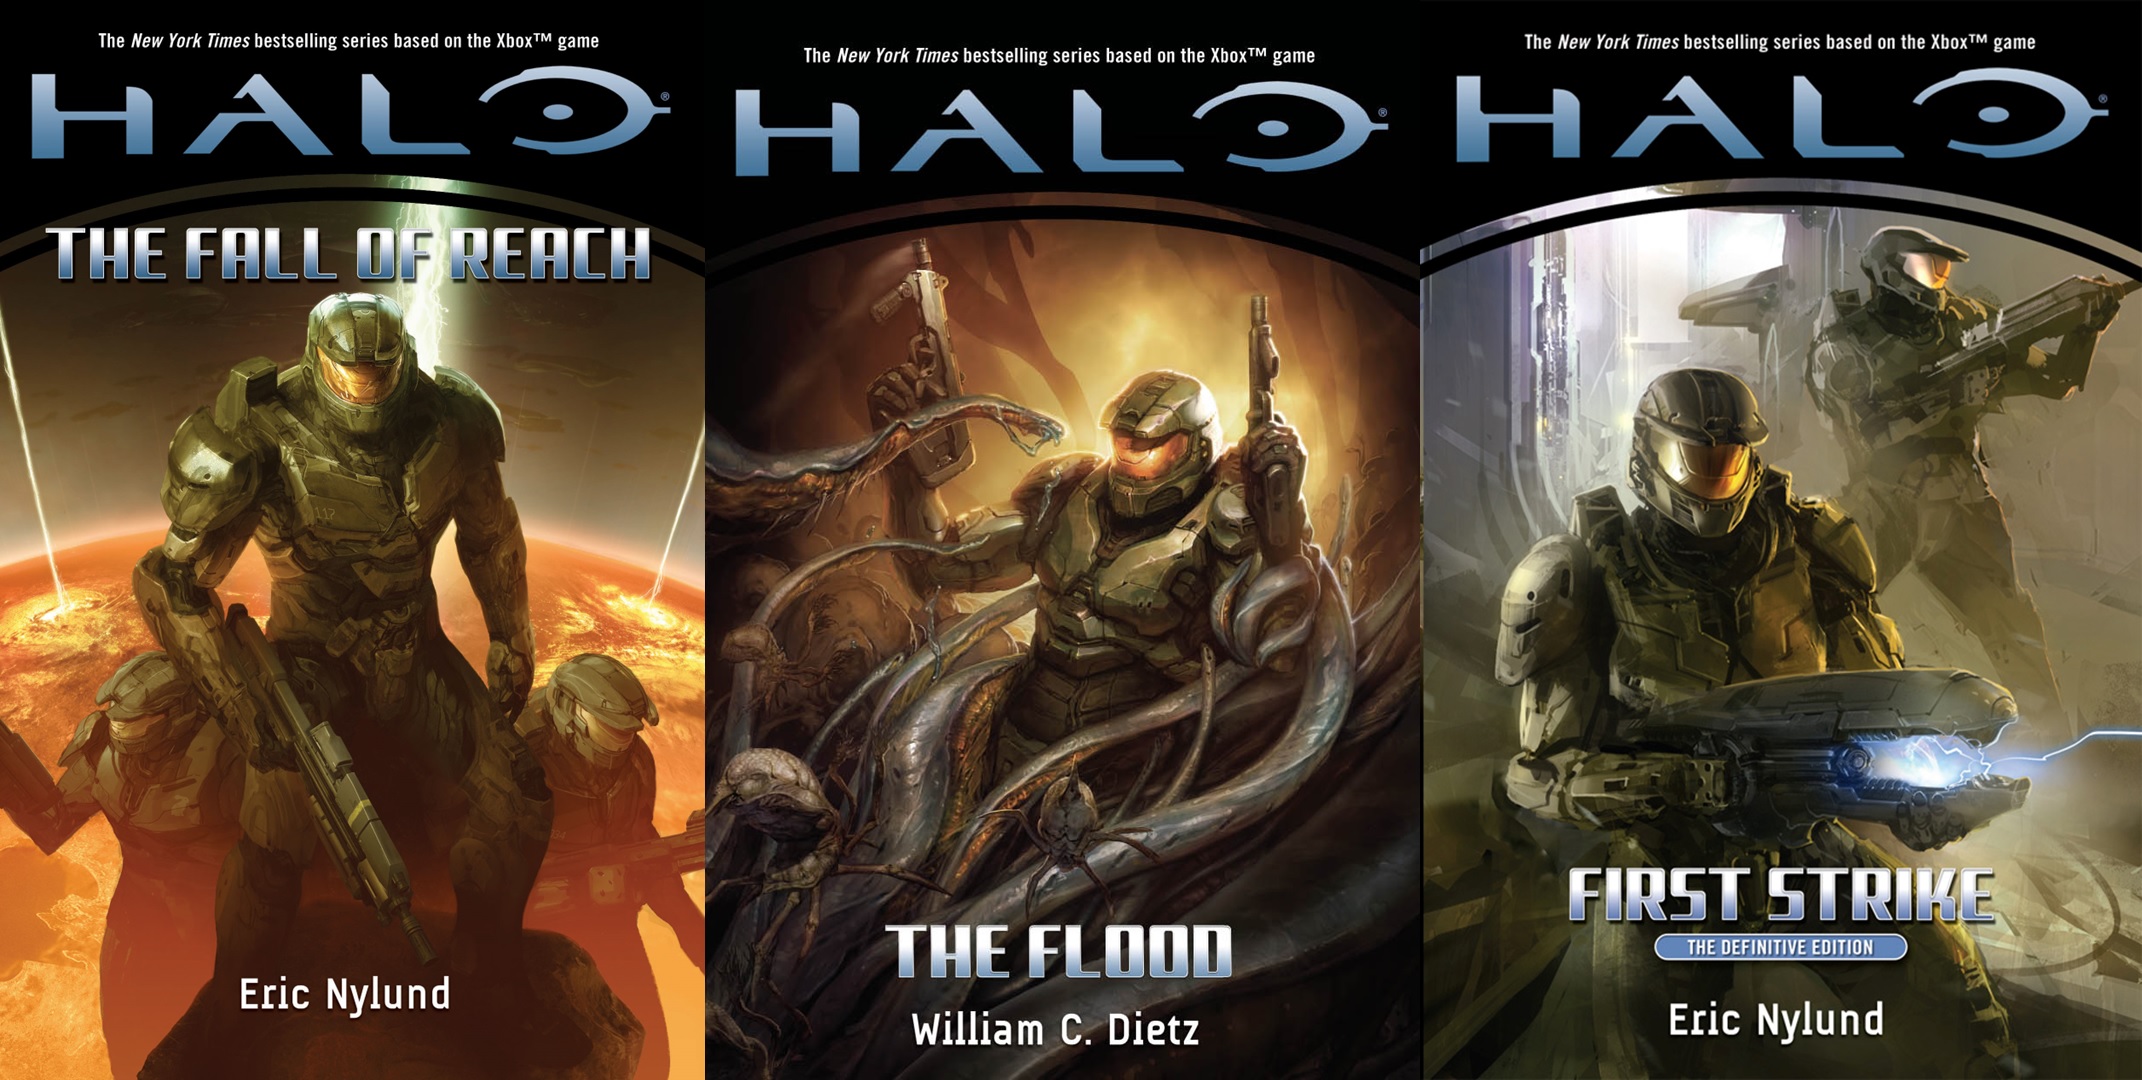 Cover art of Halo: The Fall of Reach, The Flood, and First Strike